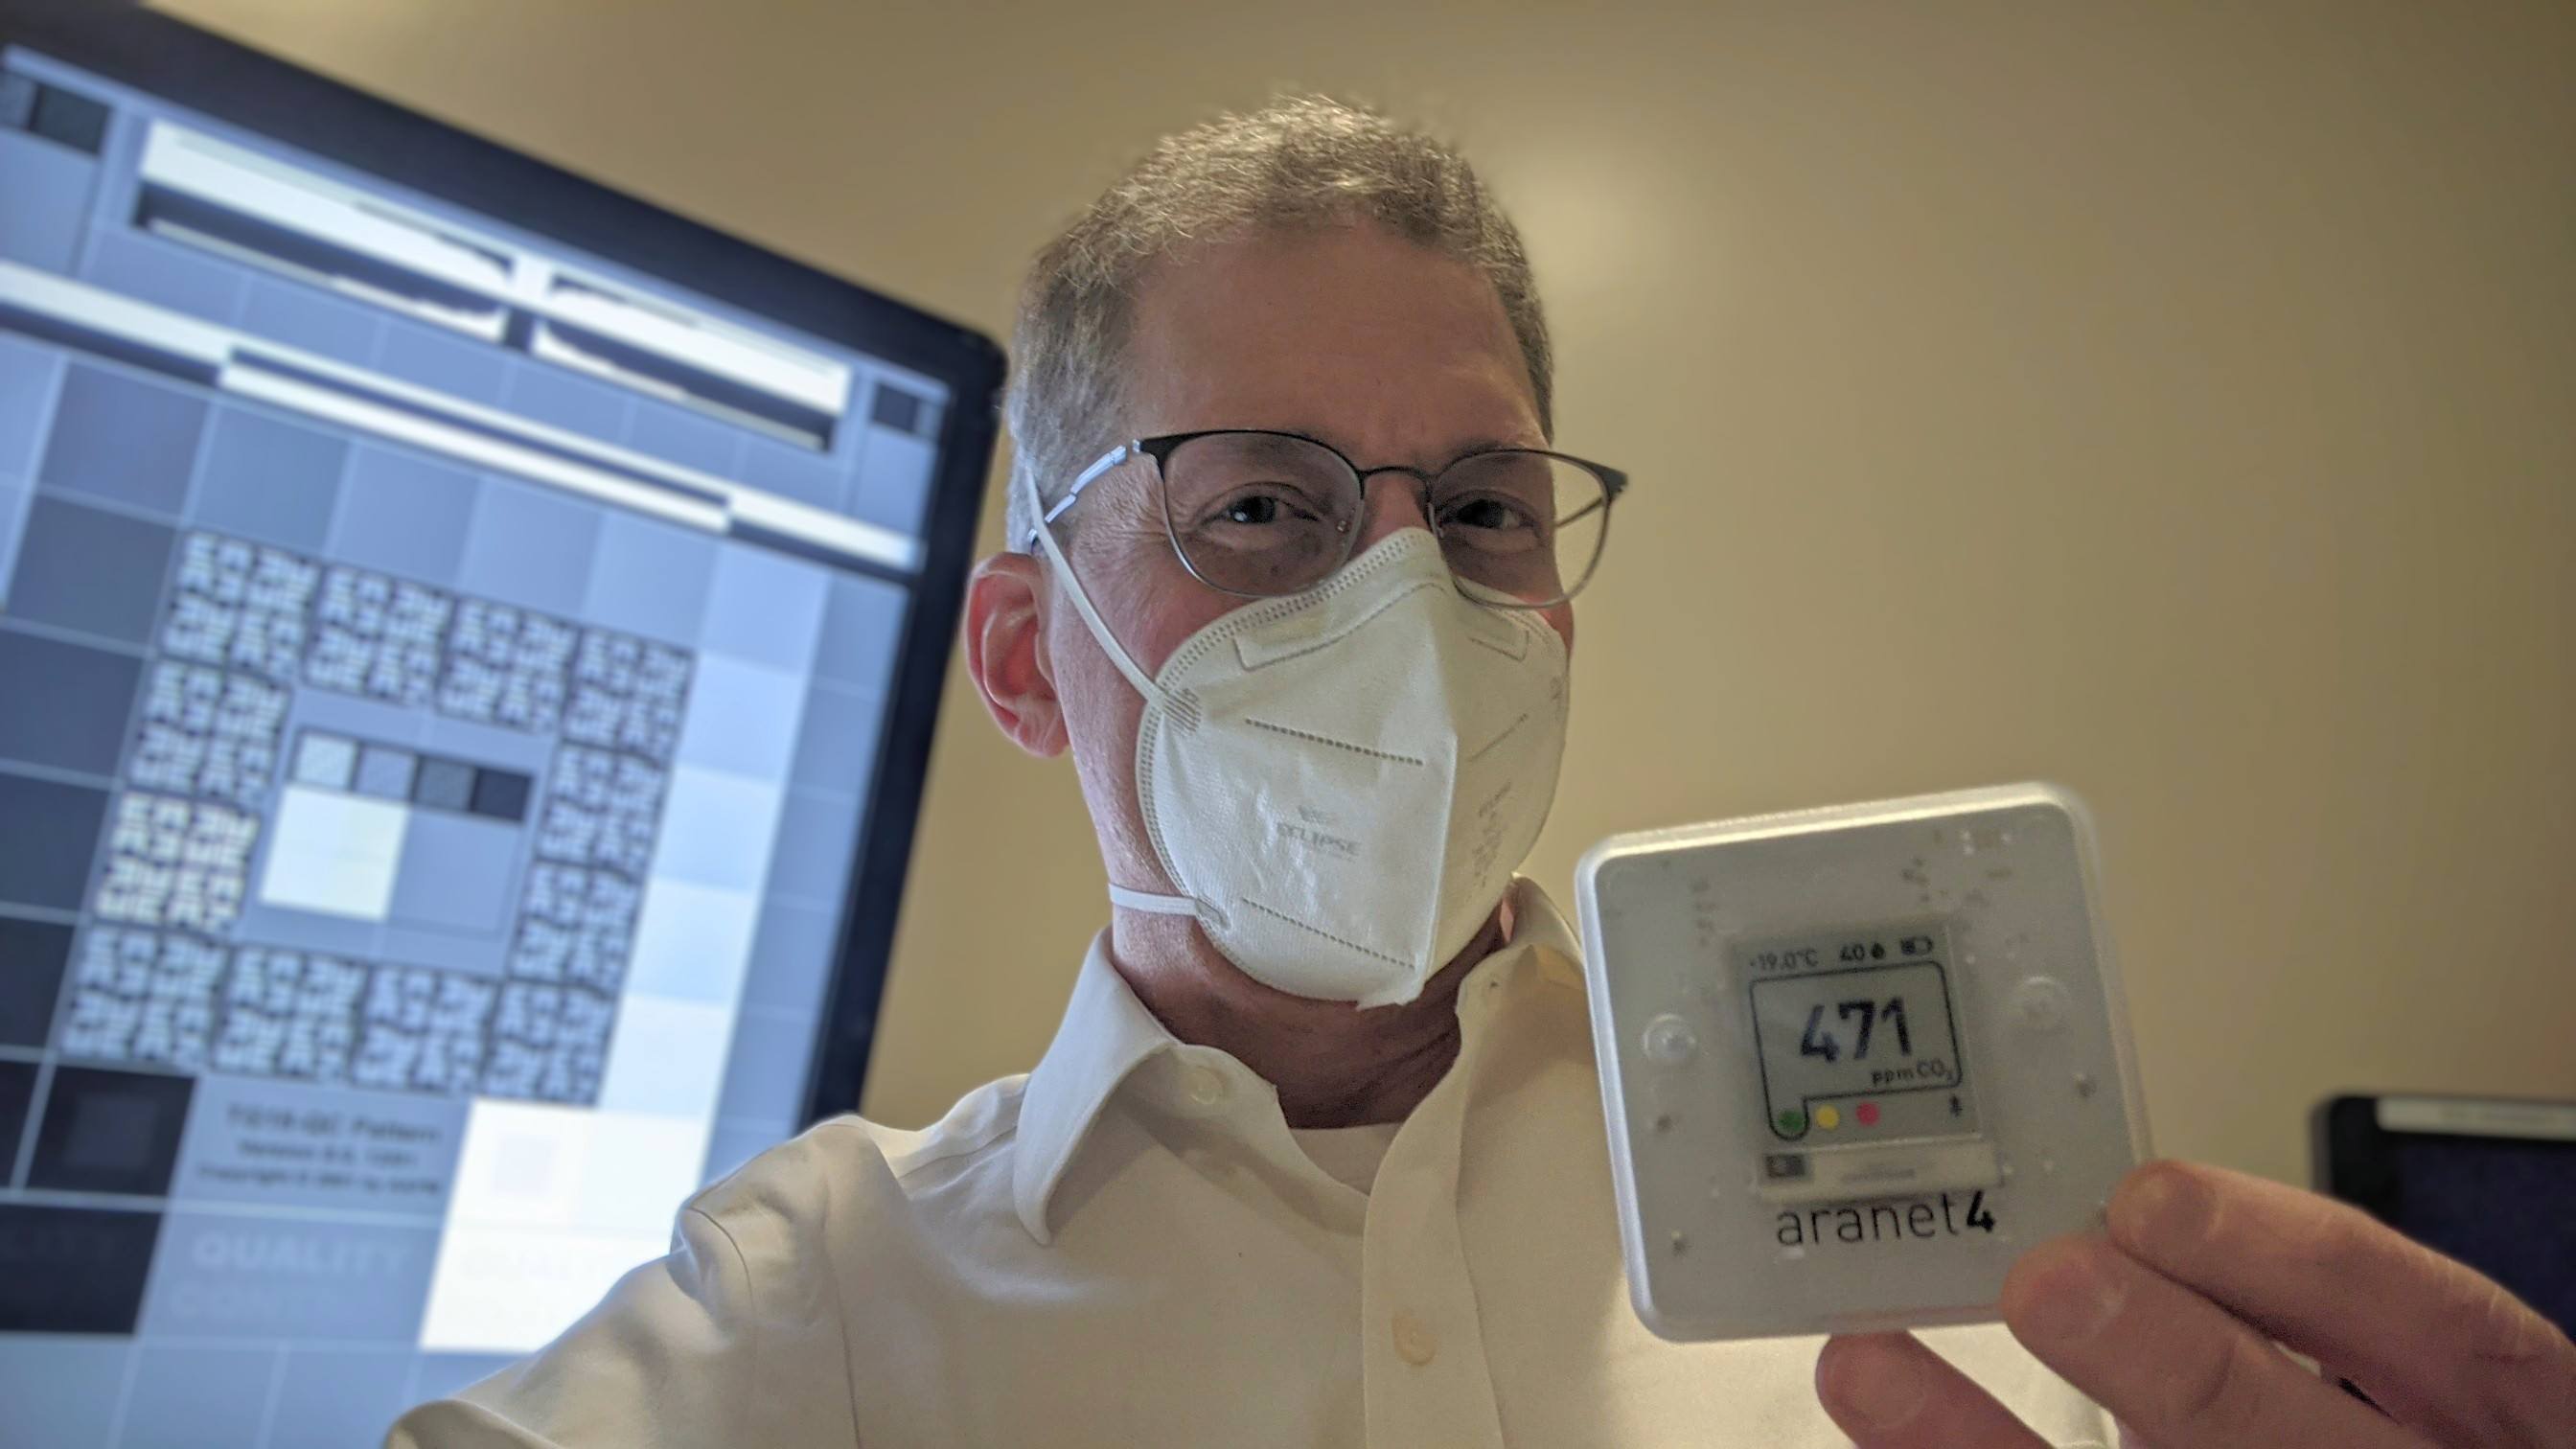 A man with eyeglasses wearing an N95 bifold respirator holds up a CO2 meter displaying 471 ppm. In the background is a radiology monitor with a test patter